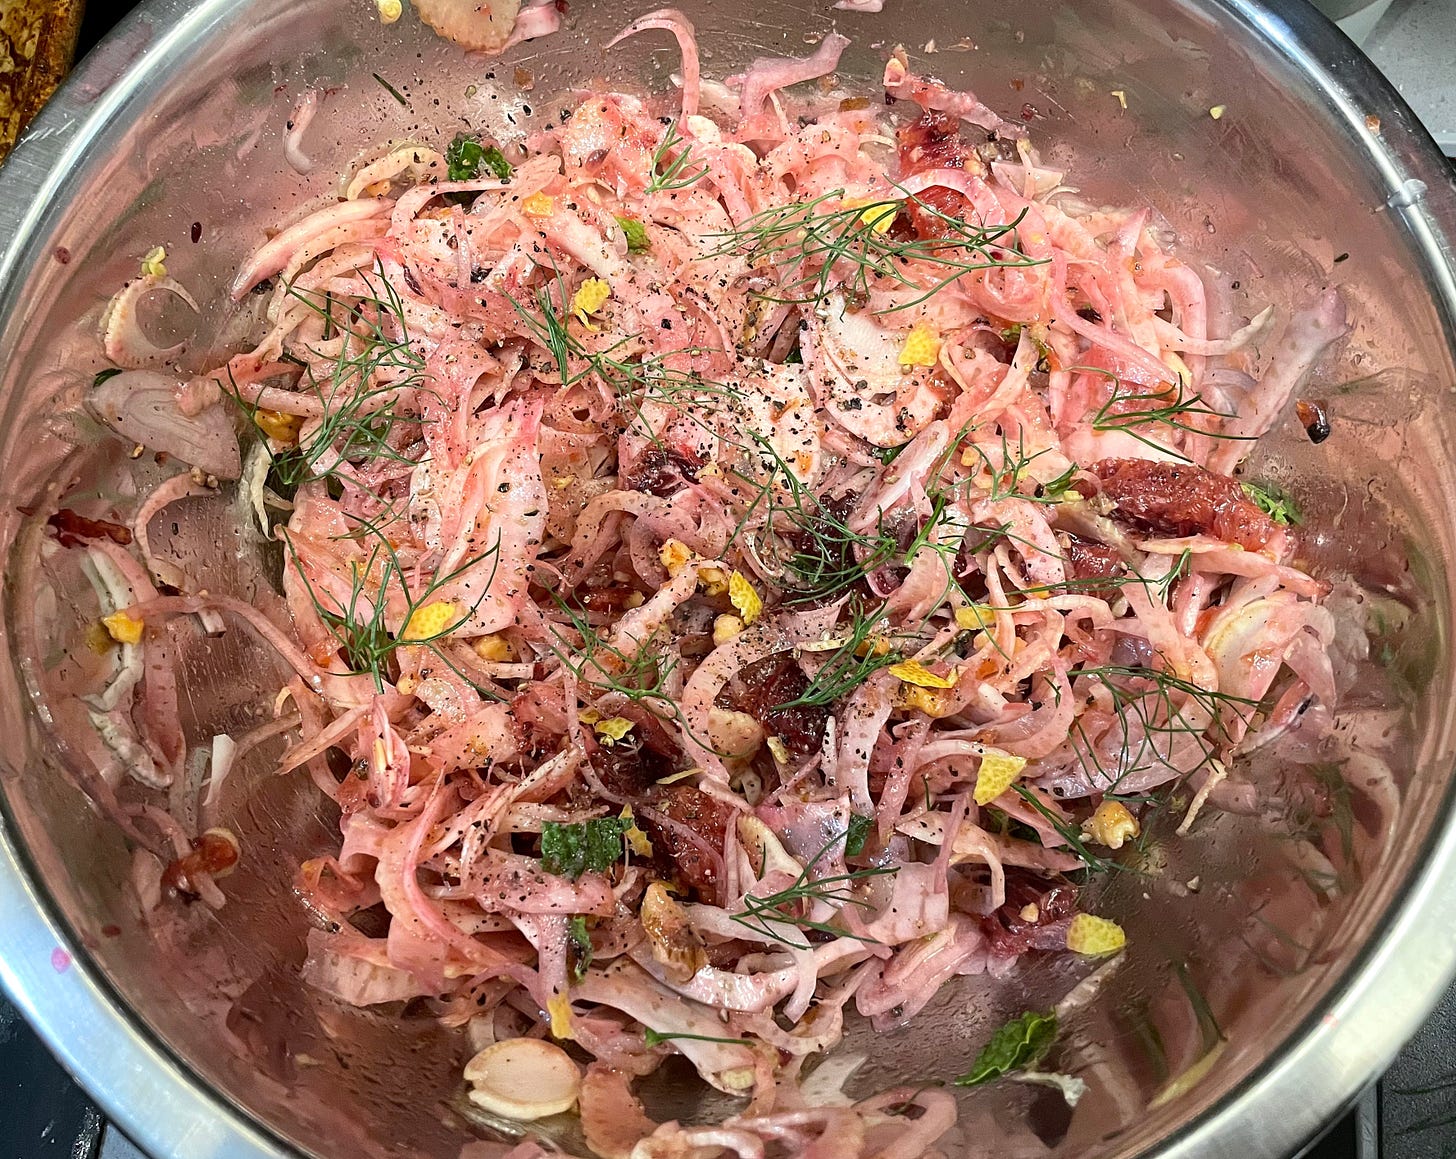 raw fennel and blood orange salad with walnuts and shallots in silver bowl